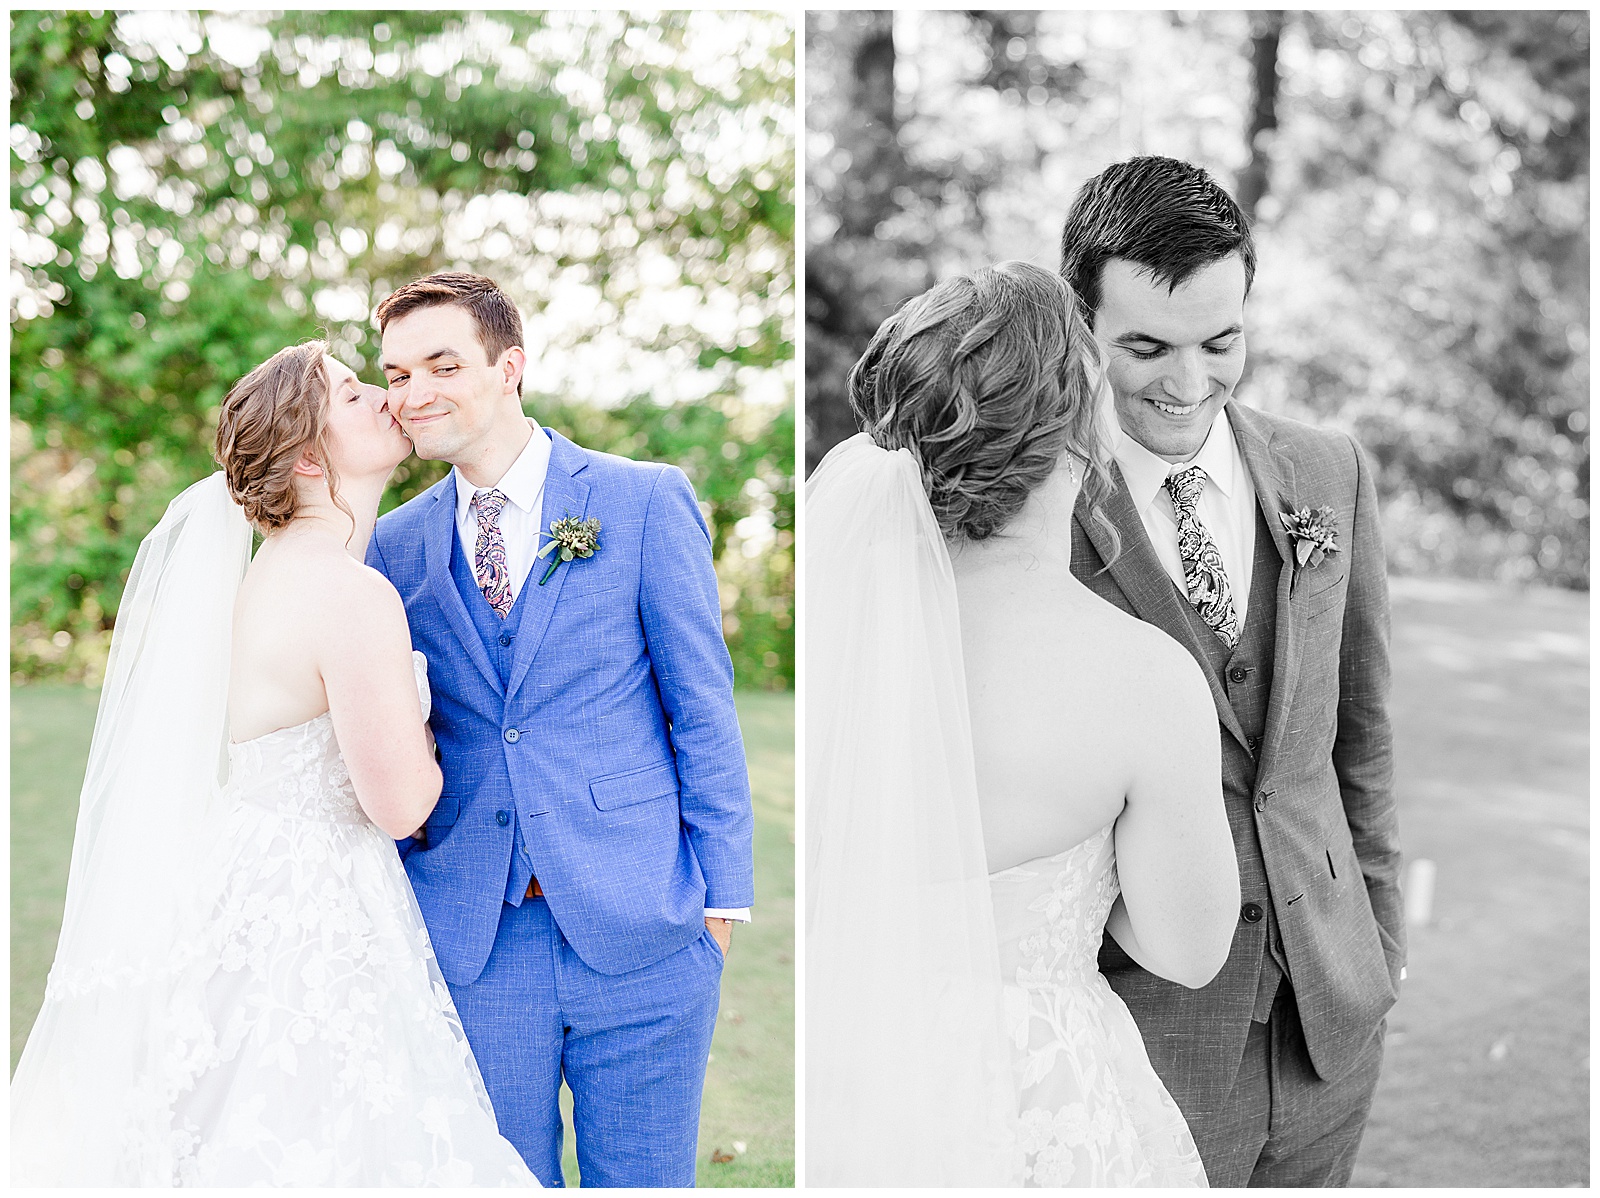 Gorgeous golden hour outdoor photos of Bride and Groom from Outdoorsy Summer Wedding at North Carolina Lakehouse | check out the full wedding at KevynDixonPhoto.com